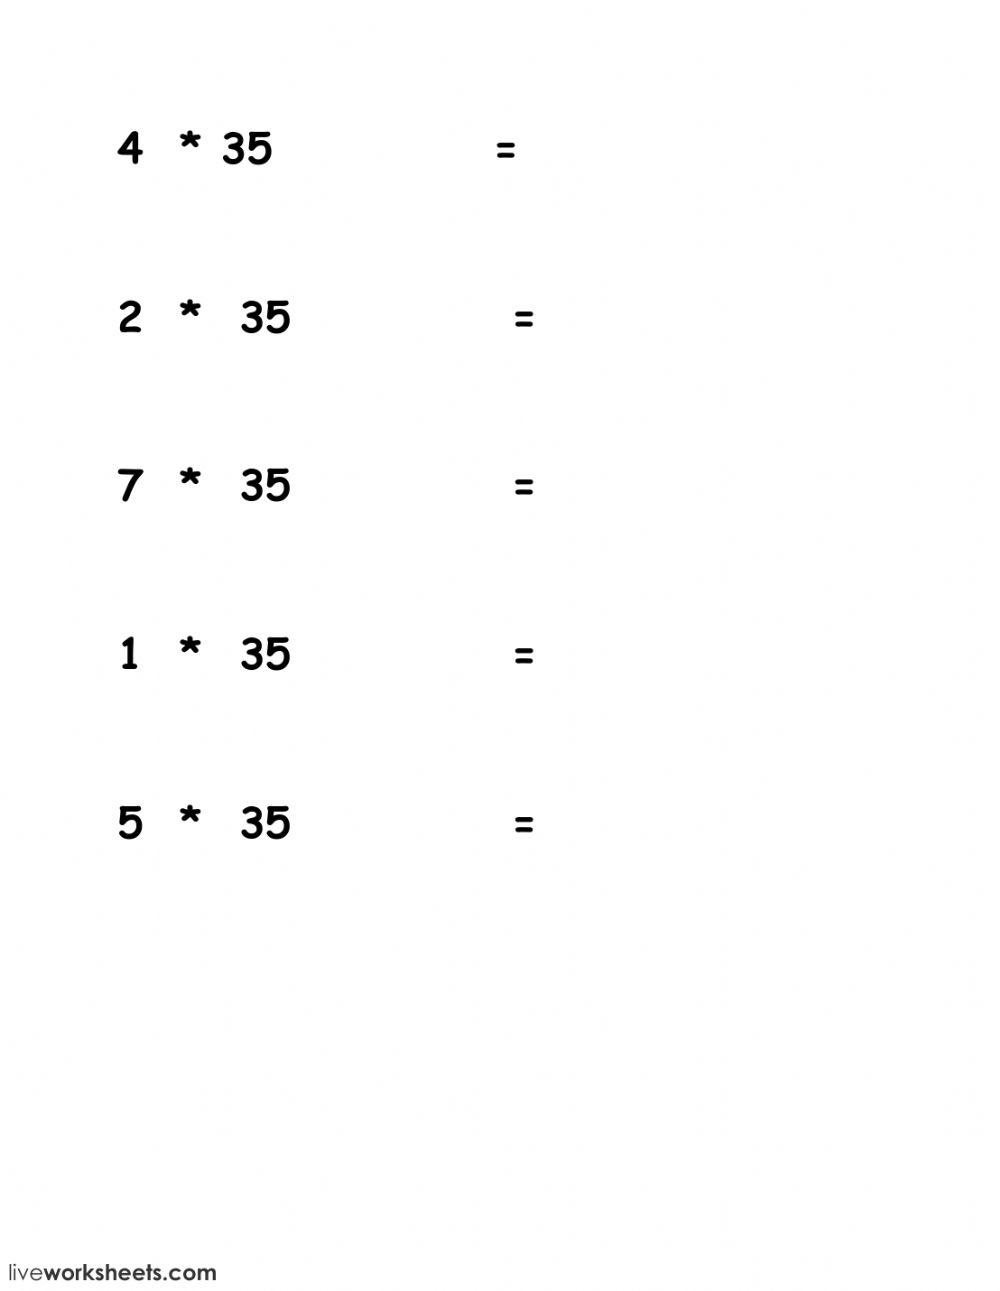 35 times table